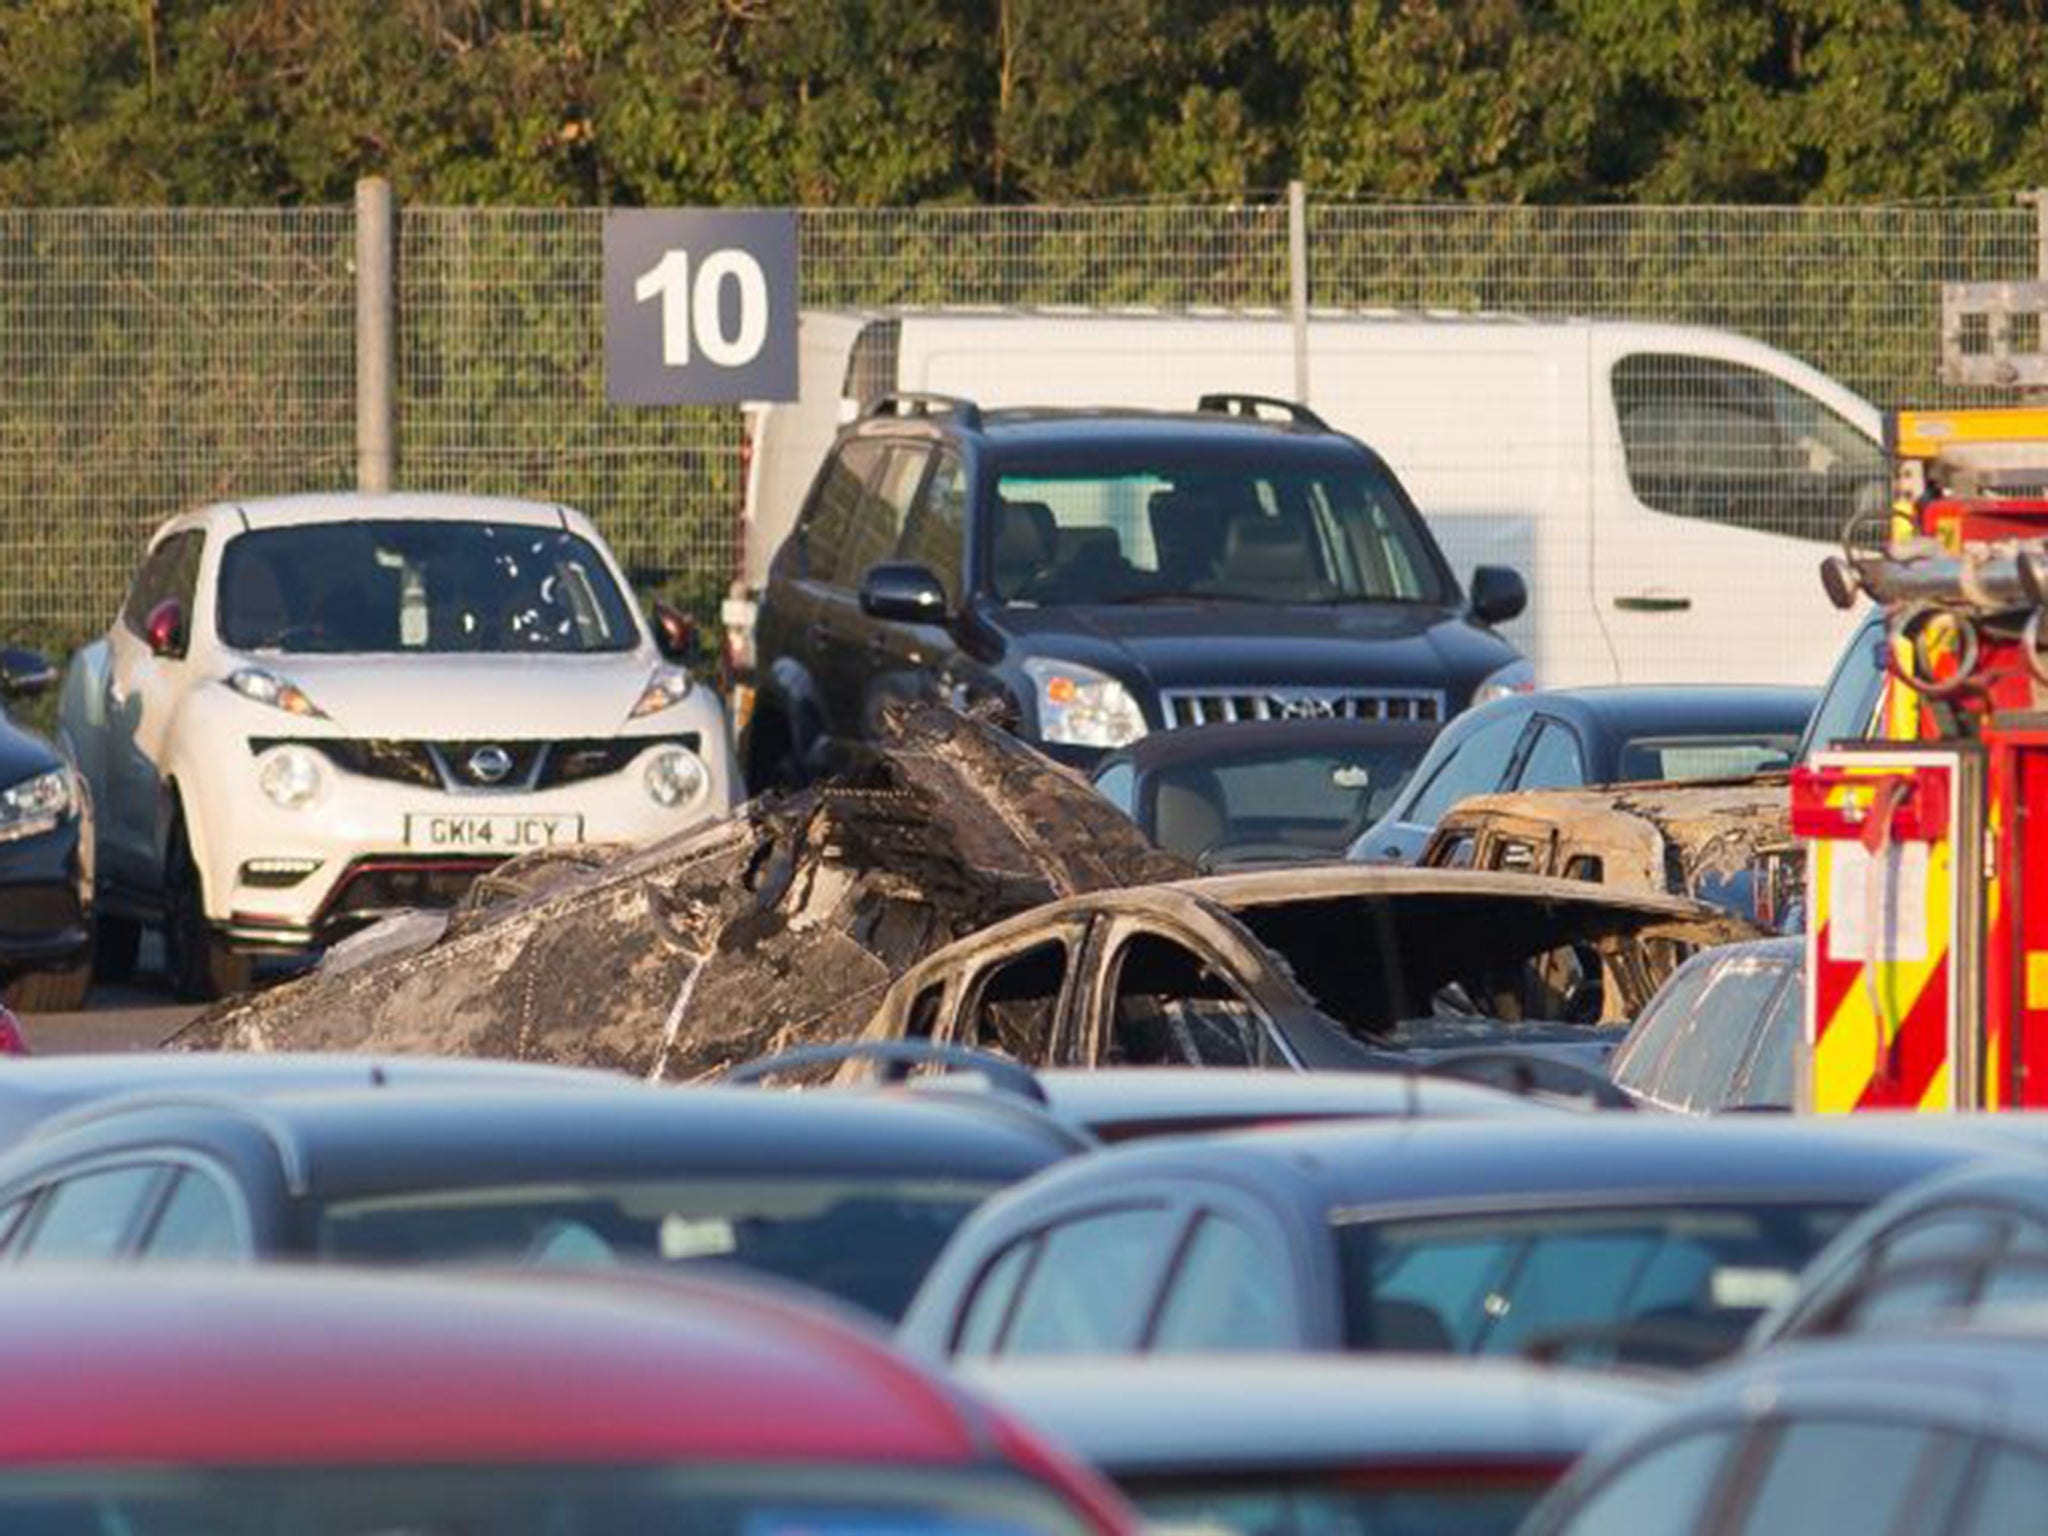 Debris from the jet that crashed into a car auction site on Friday